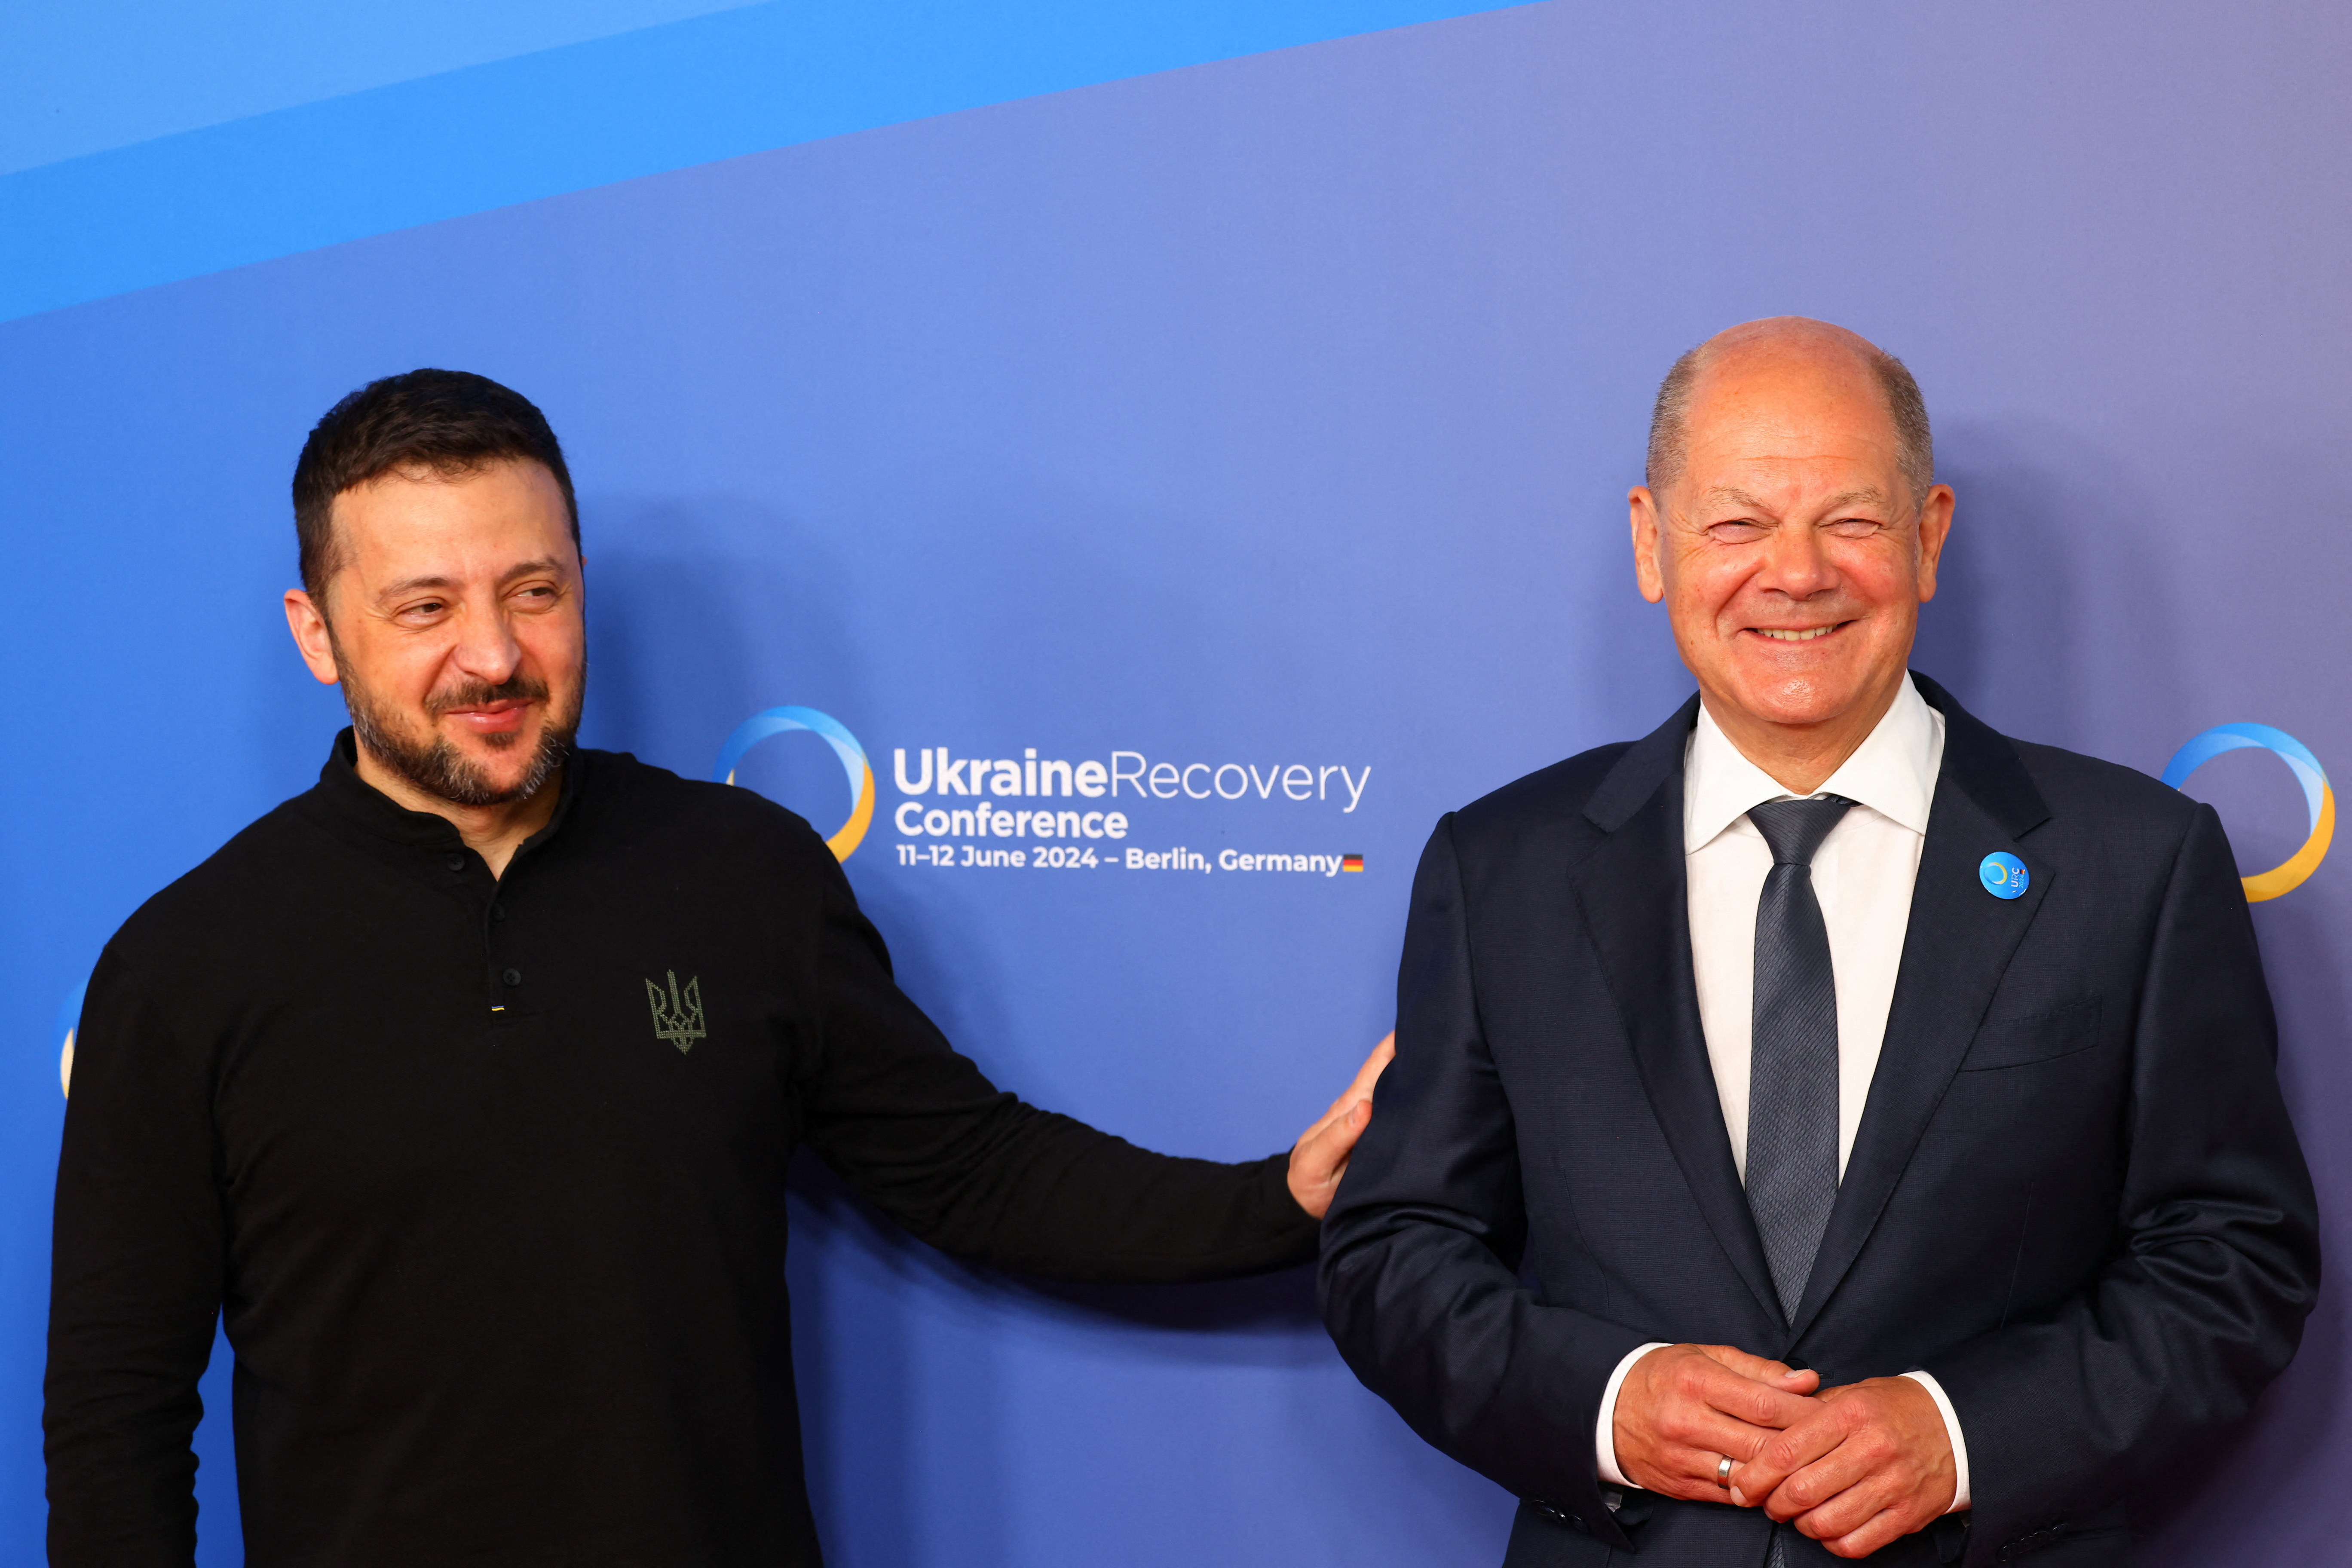 Ukraine Recovery Conference in Berlin